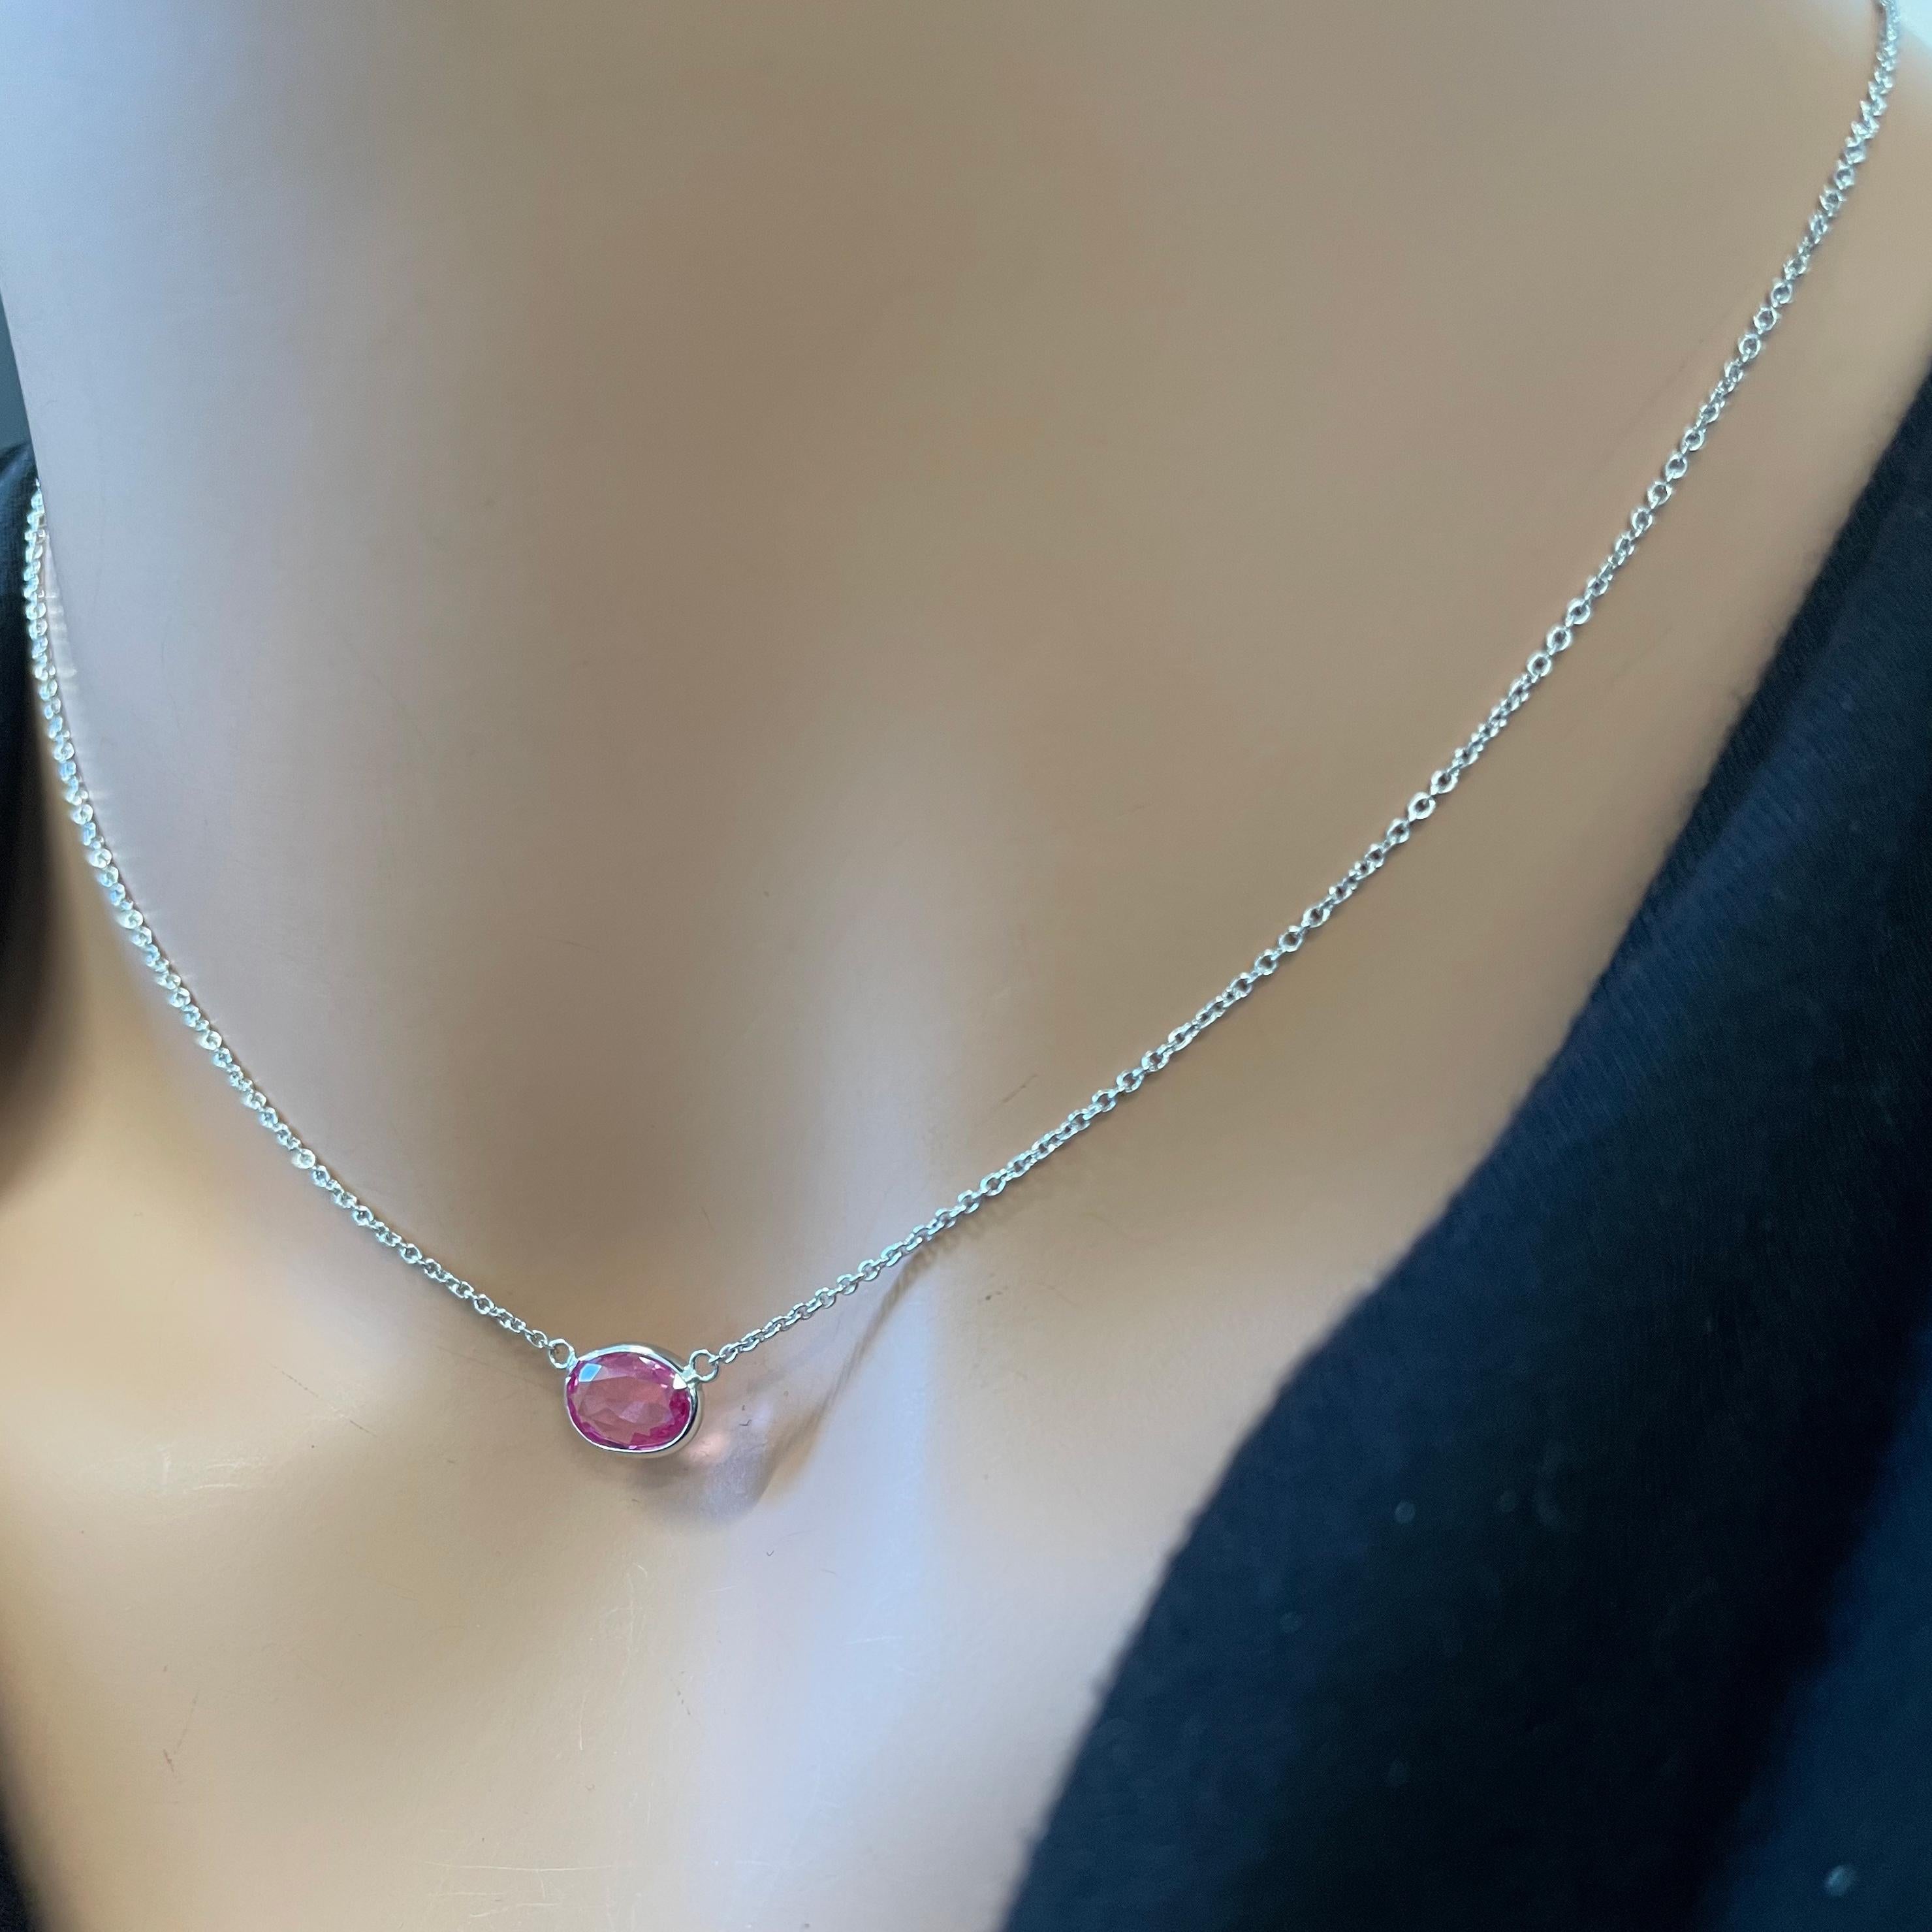 The 1.56 carat Oval Cut Pink Padparadscha Necklace in 14K White Gold is a truly enchanting piece of jewelry that seamlessly marries sophistication with a touch of romance. This necklace showcases a captivating Padparadscha sapphire, revered for its